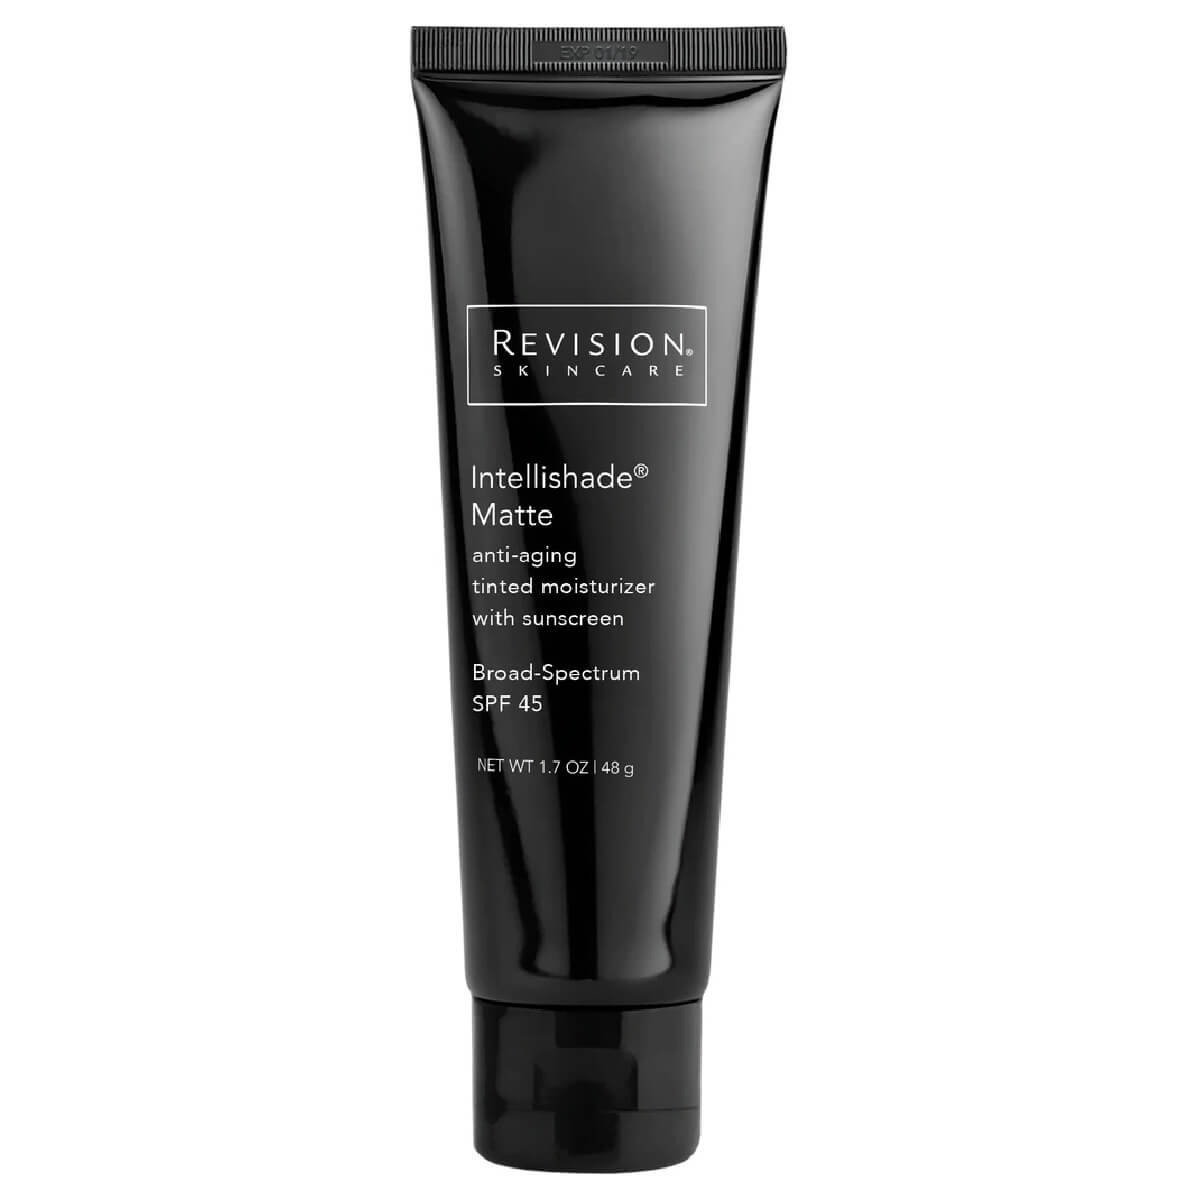 Bottle of Revision Intellishade Original Anti-aging Tinted Moisturizer with Sunscreen SPF 45